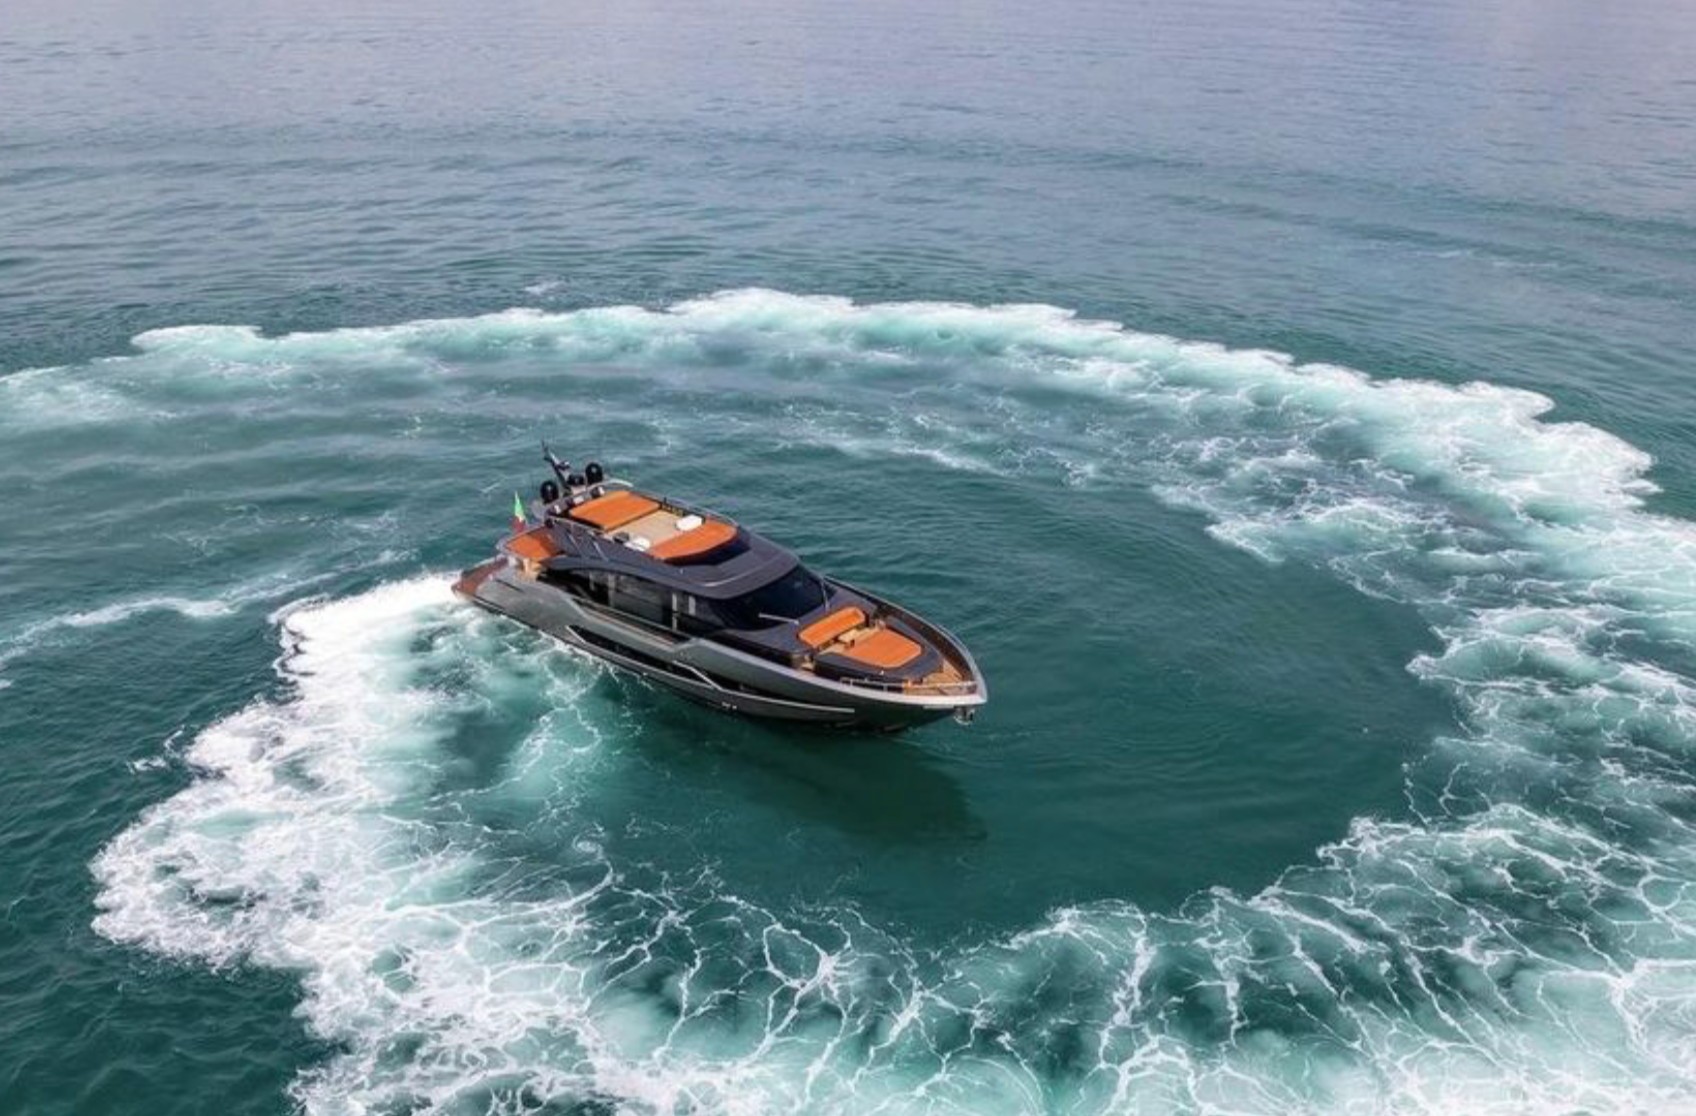 this fresh 11 million luxury toy hits the waves at more than 65 mph 6